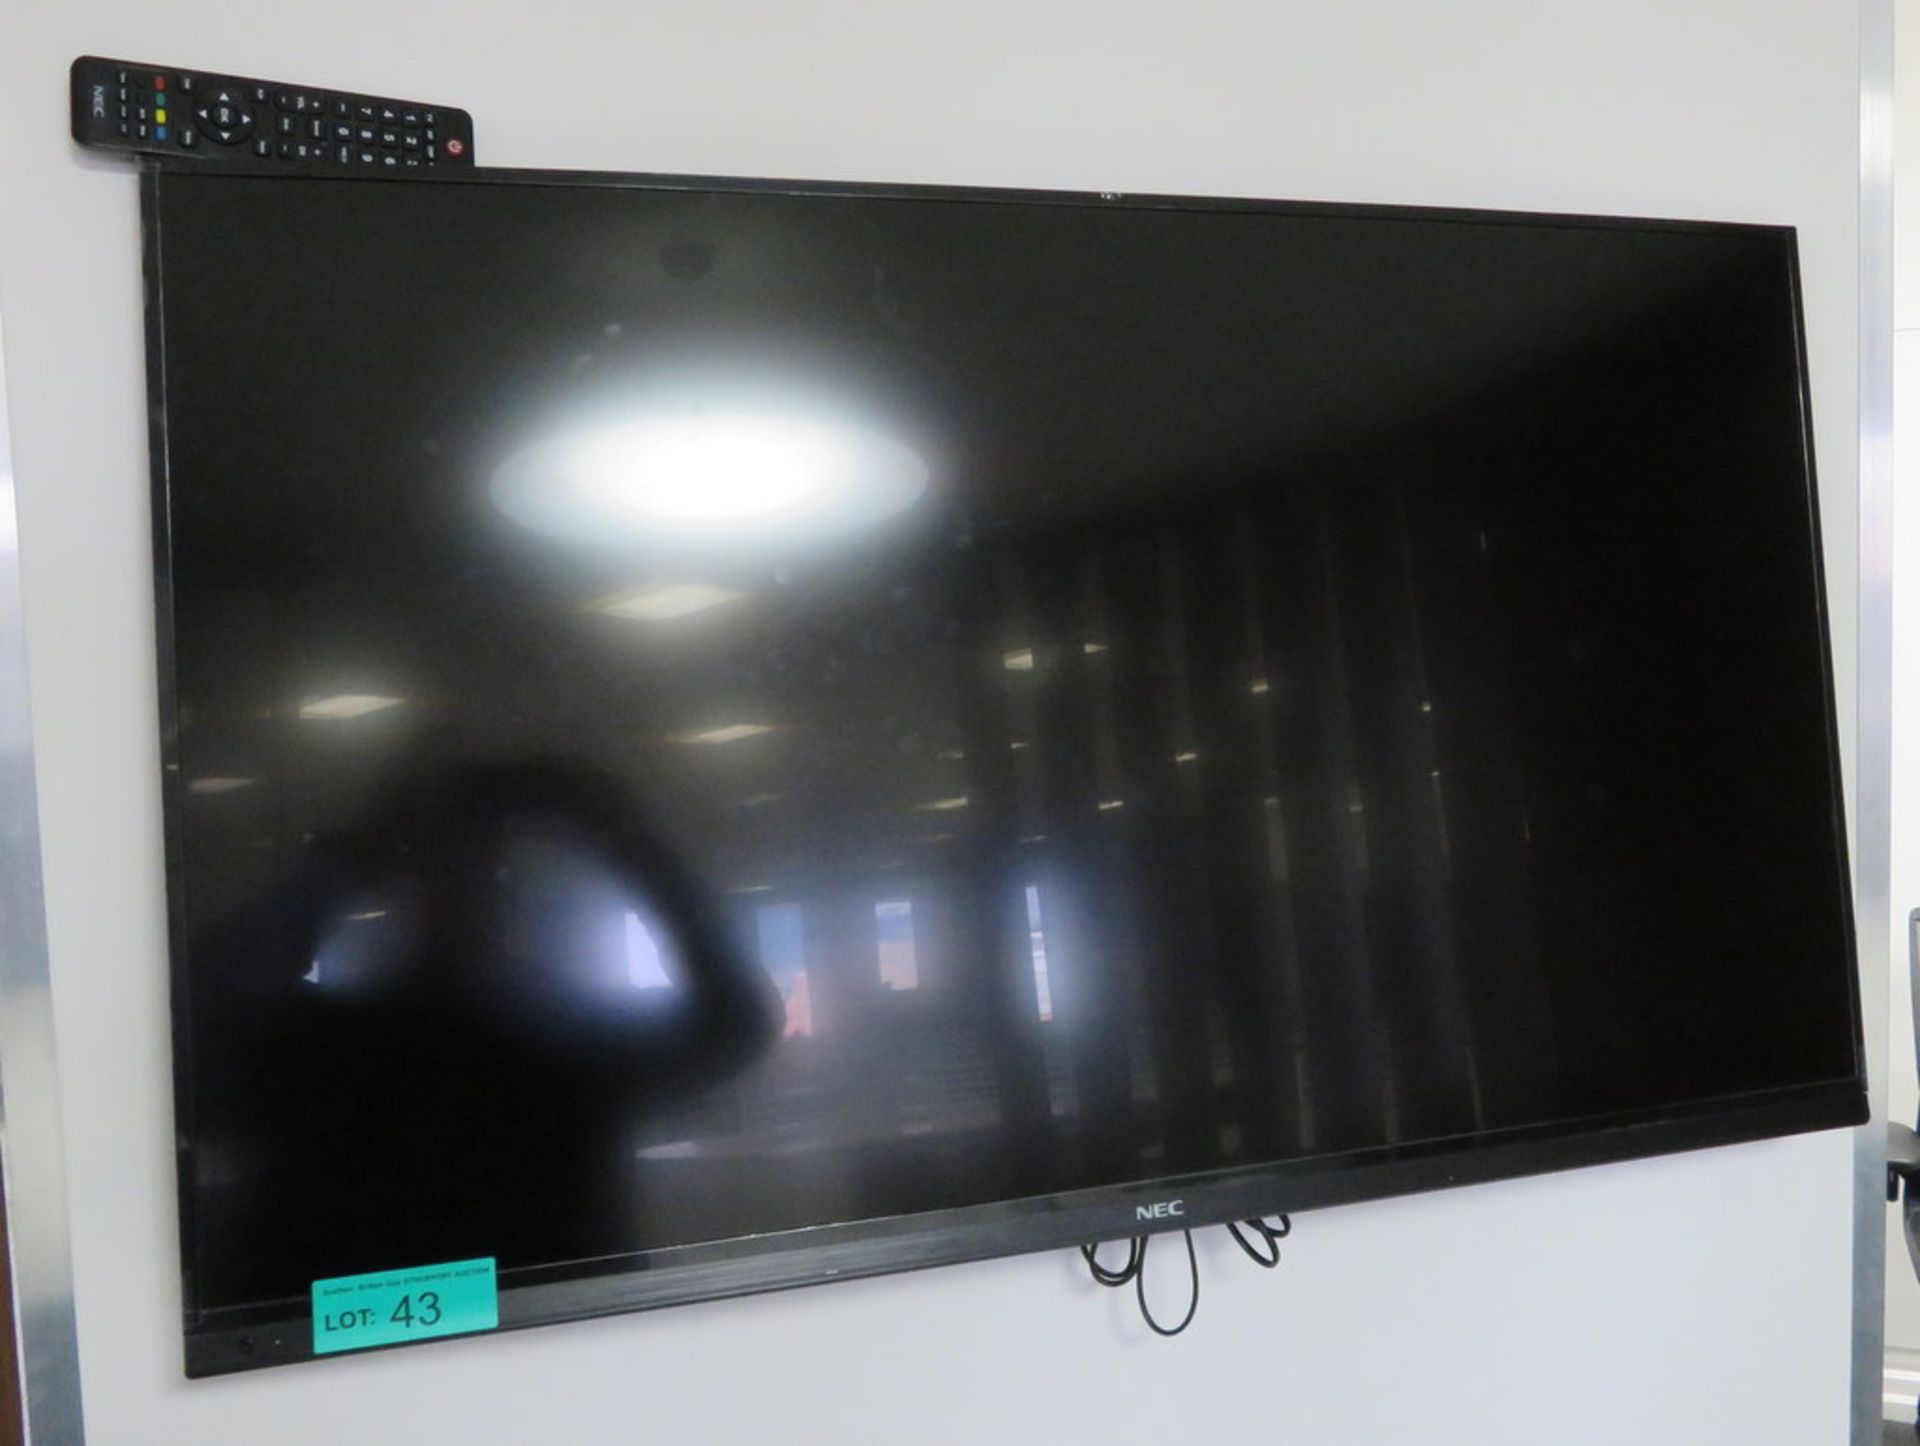 NEC E464 46" TV. Please Note There Is No Stand And The Wall Mount Is Not Included.